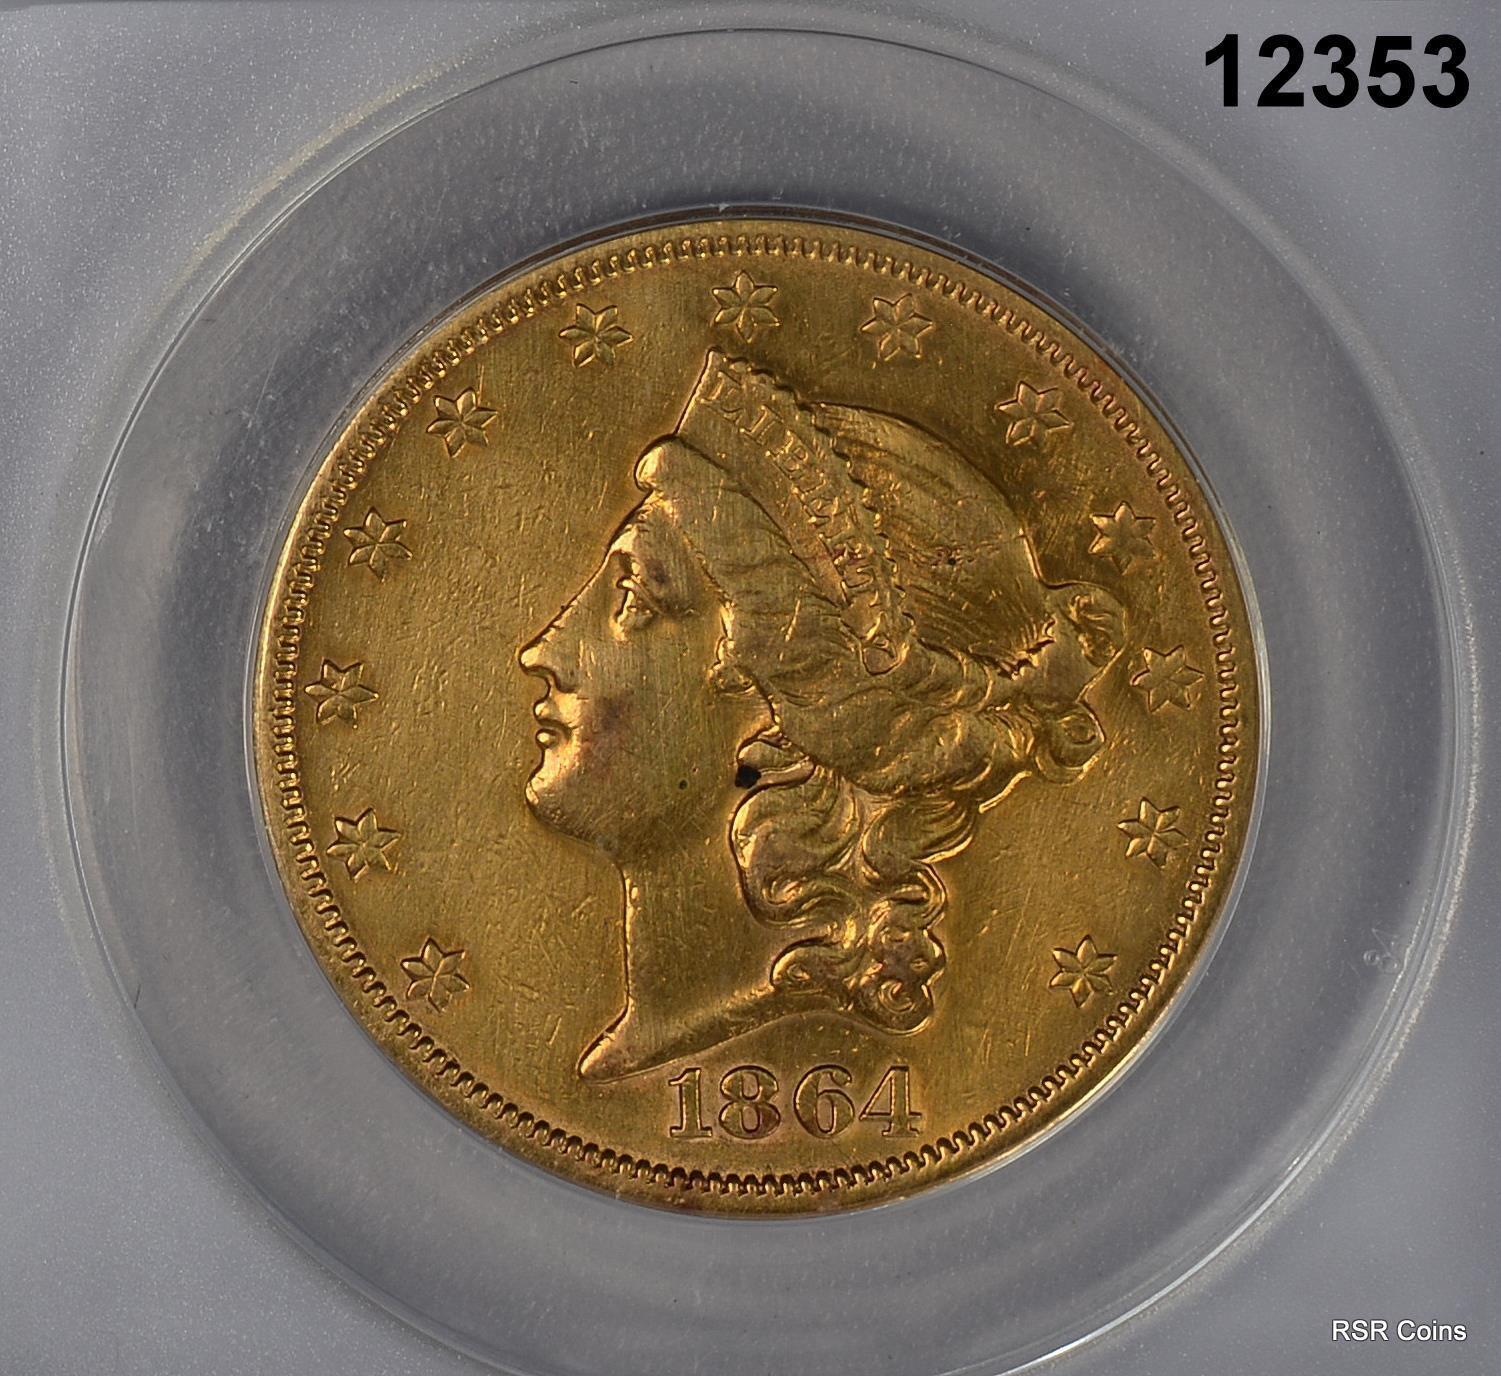 1864 S $20 GOLD LIBERTY CIVIL WAR DATE ANACS CERTIFIED AU50 TOOLED #12353